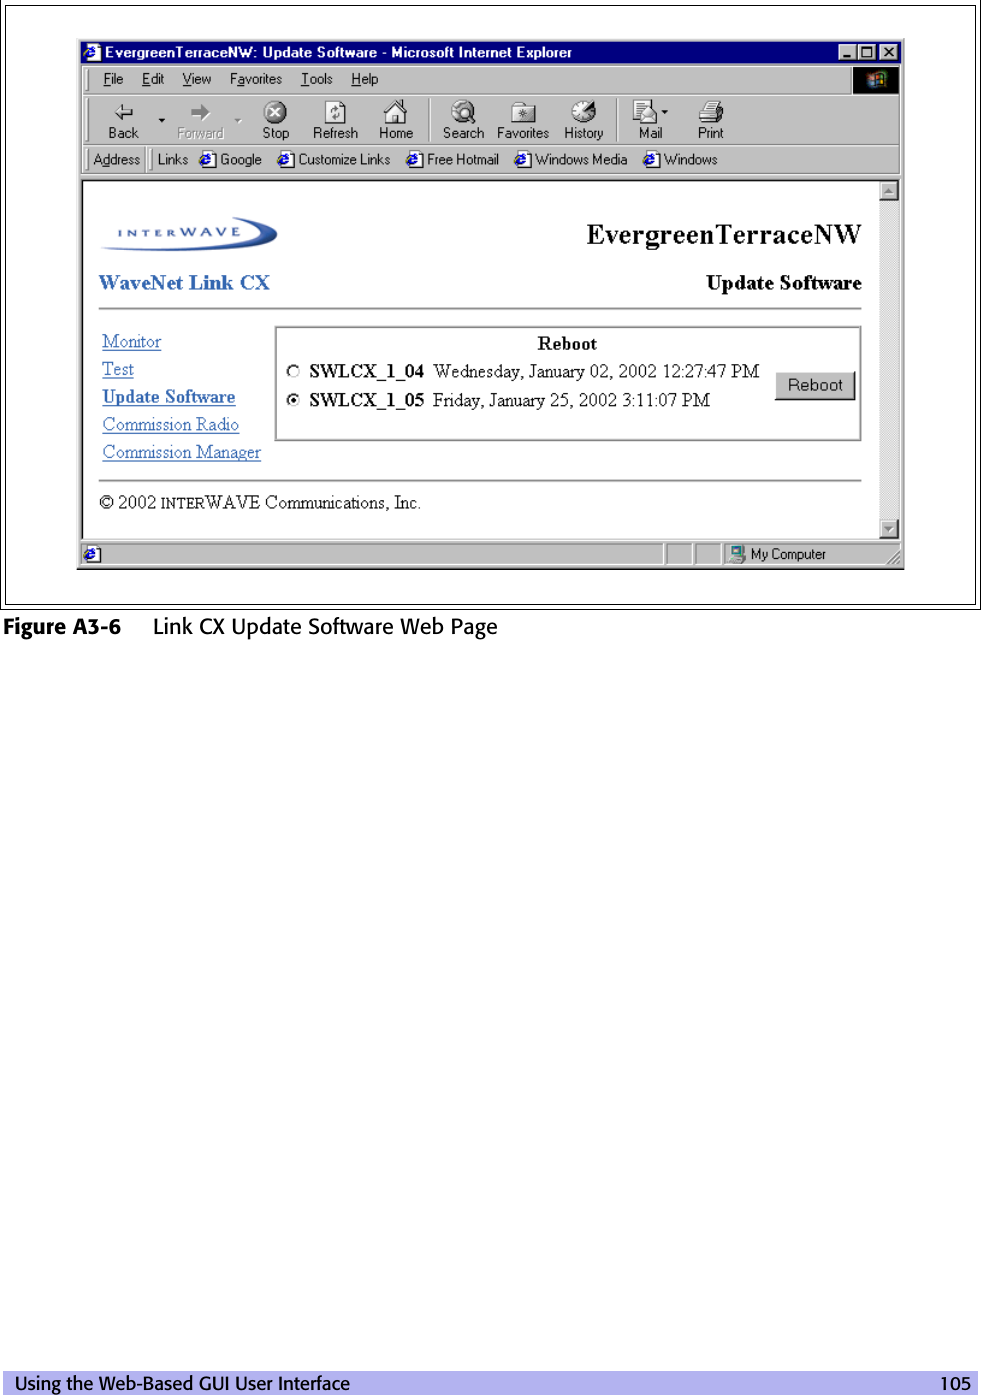  Using the Web-Based GUI User Interface 105Figure A3-6 Link CX Update Software Web Page